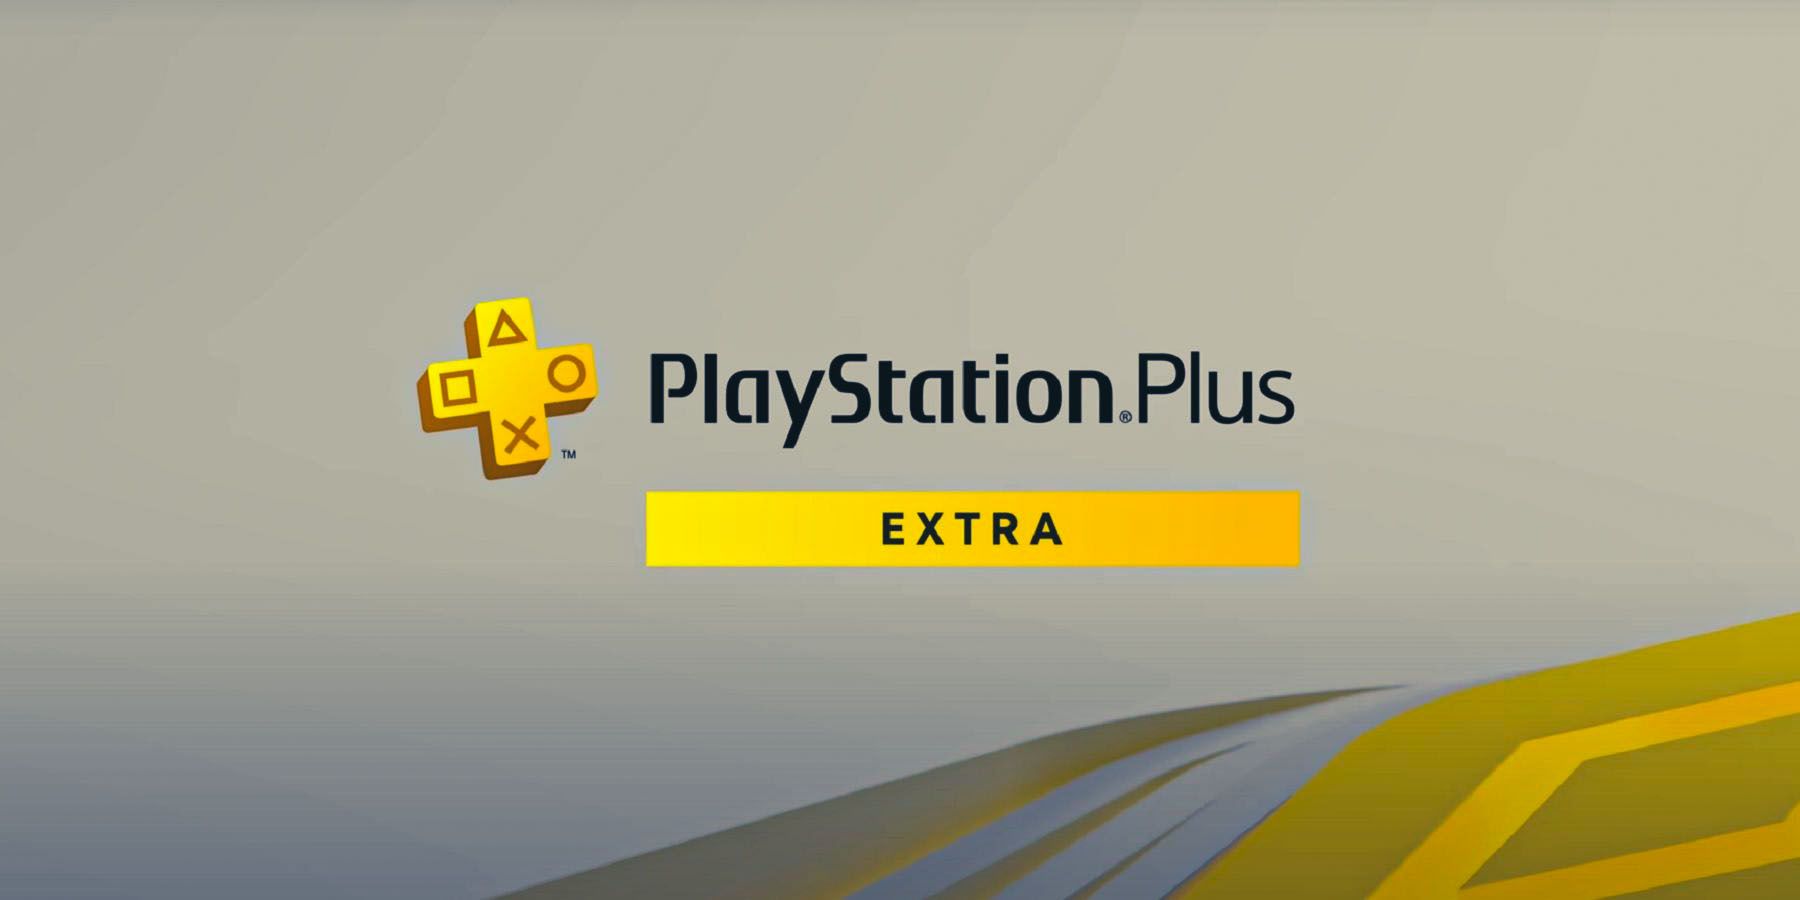 Far Cry 6, Rogue Legacy 2, Inscryption, and More Coming to PS Plus